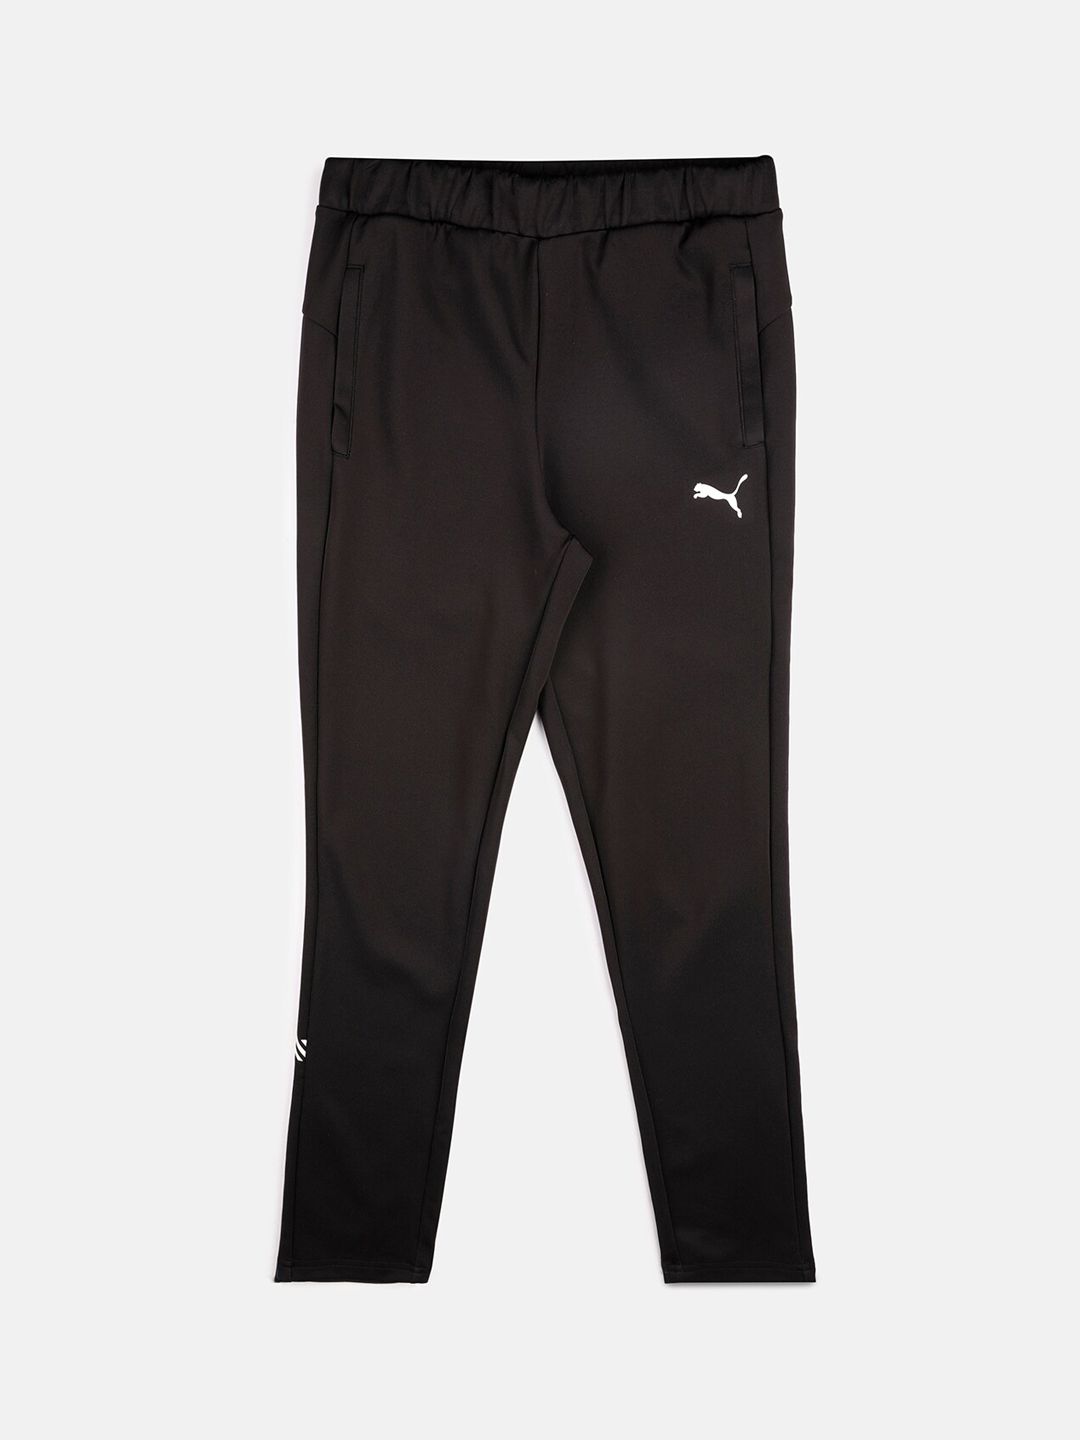 Puma T7 Trend 7etter Mens Black Trackpants Buy Puma T7 Trend 7etter Mens  Black Trackpants Online at Best Price in India  NykaaMan